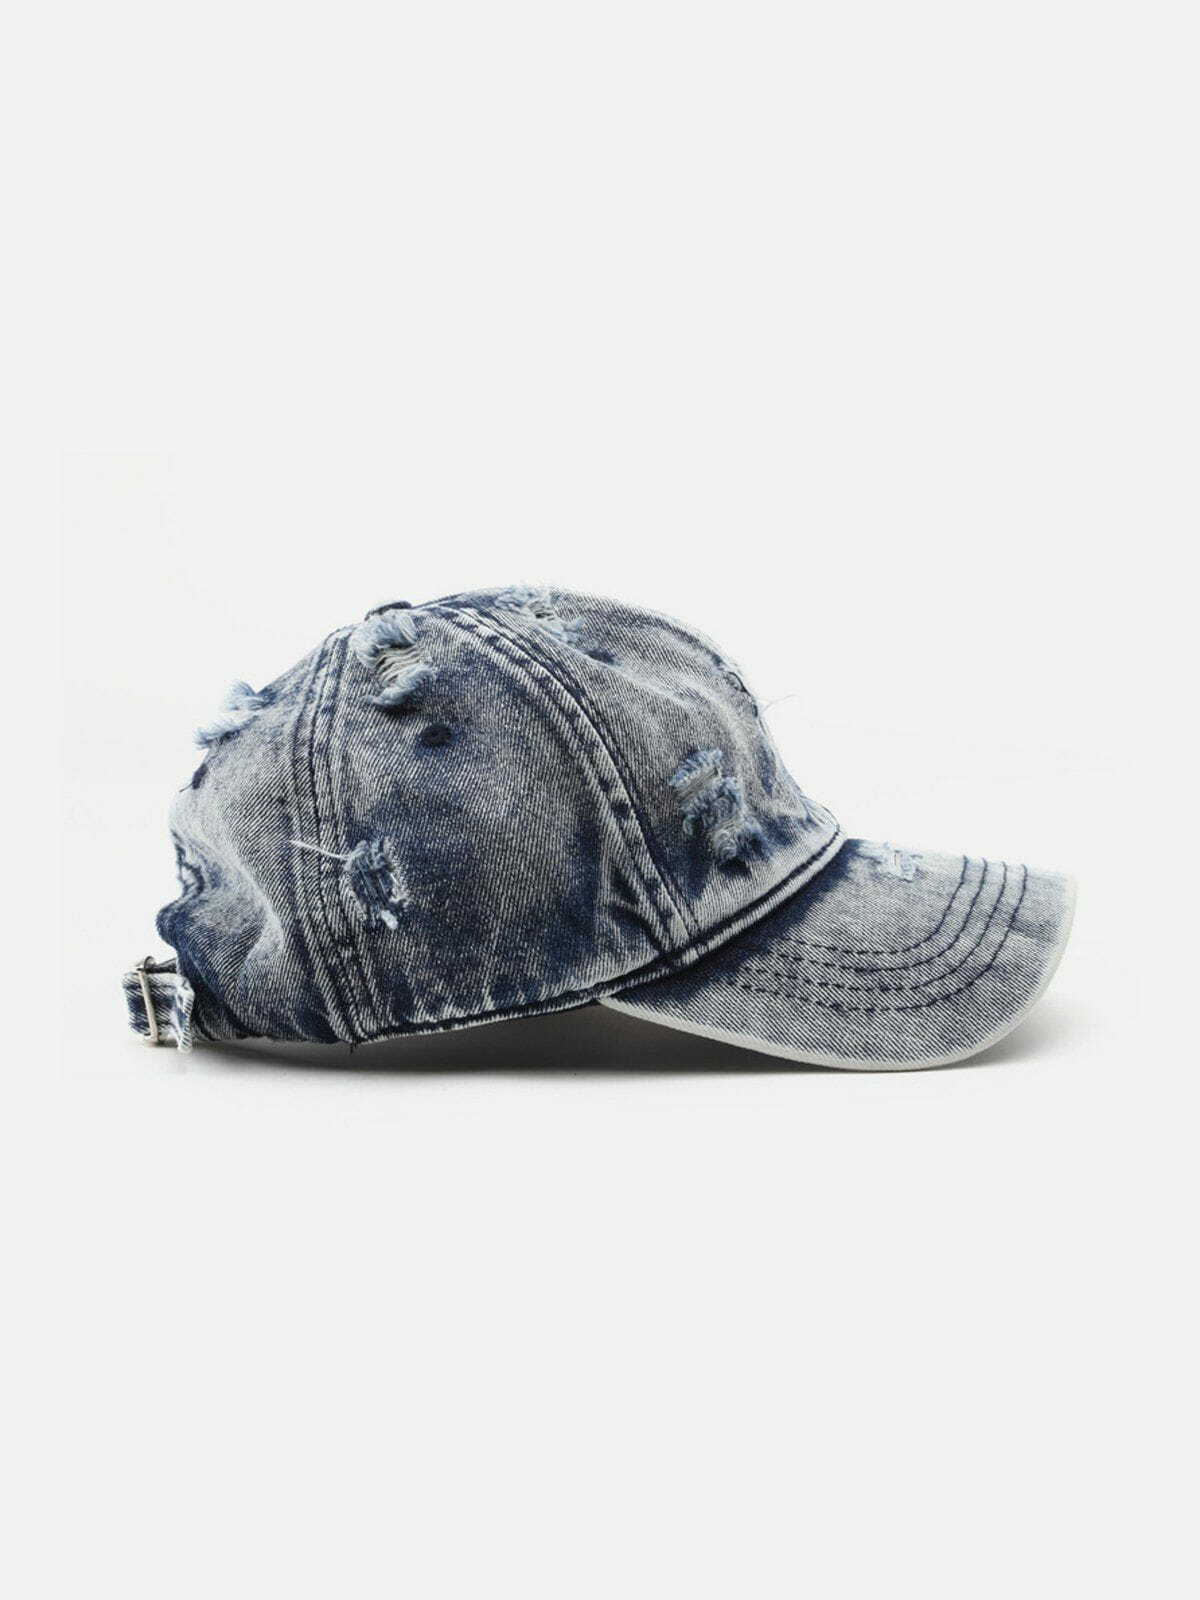 vintage washed cap with distressed fringe   urban chic 8450